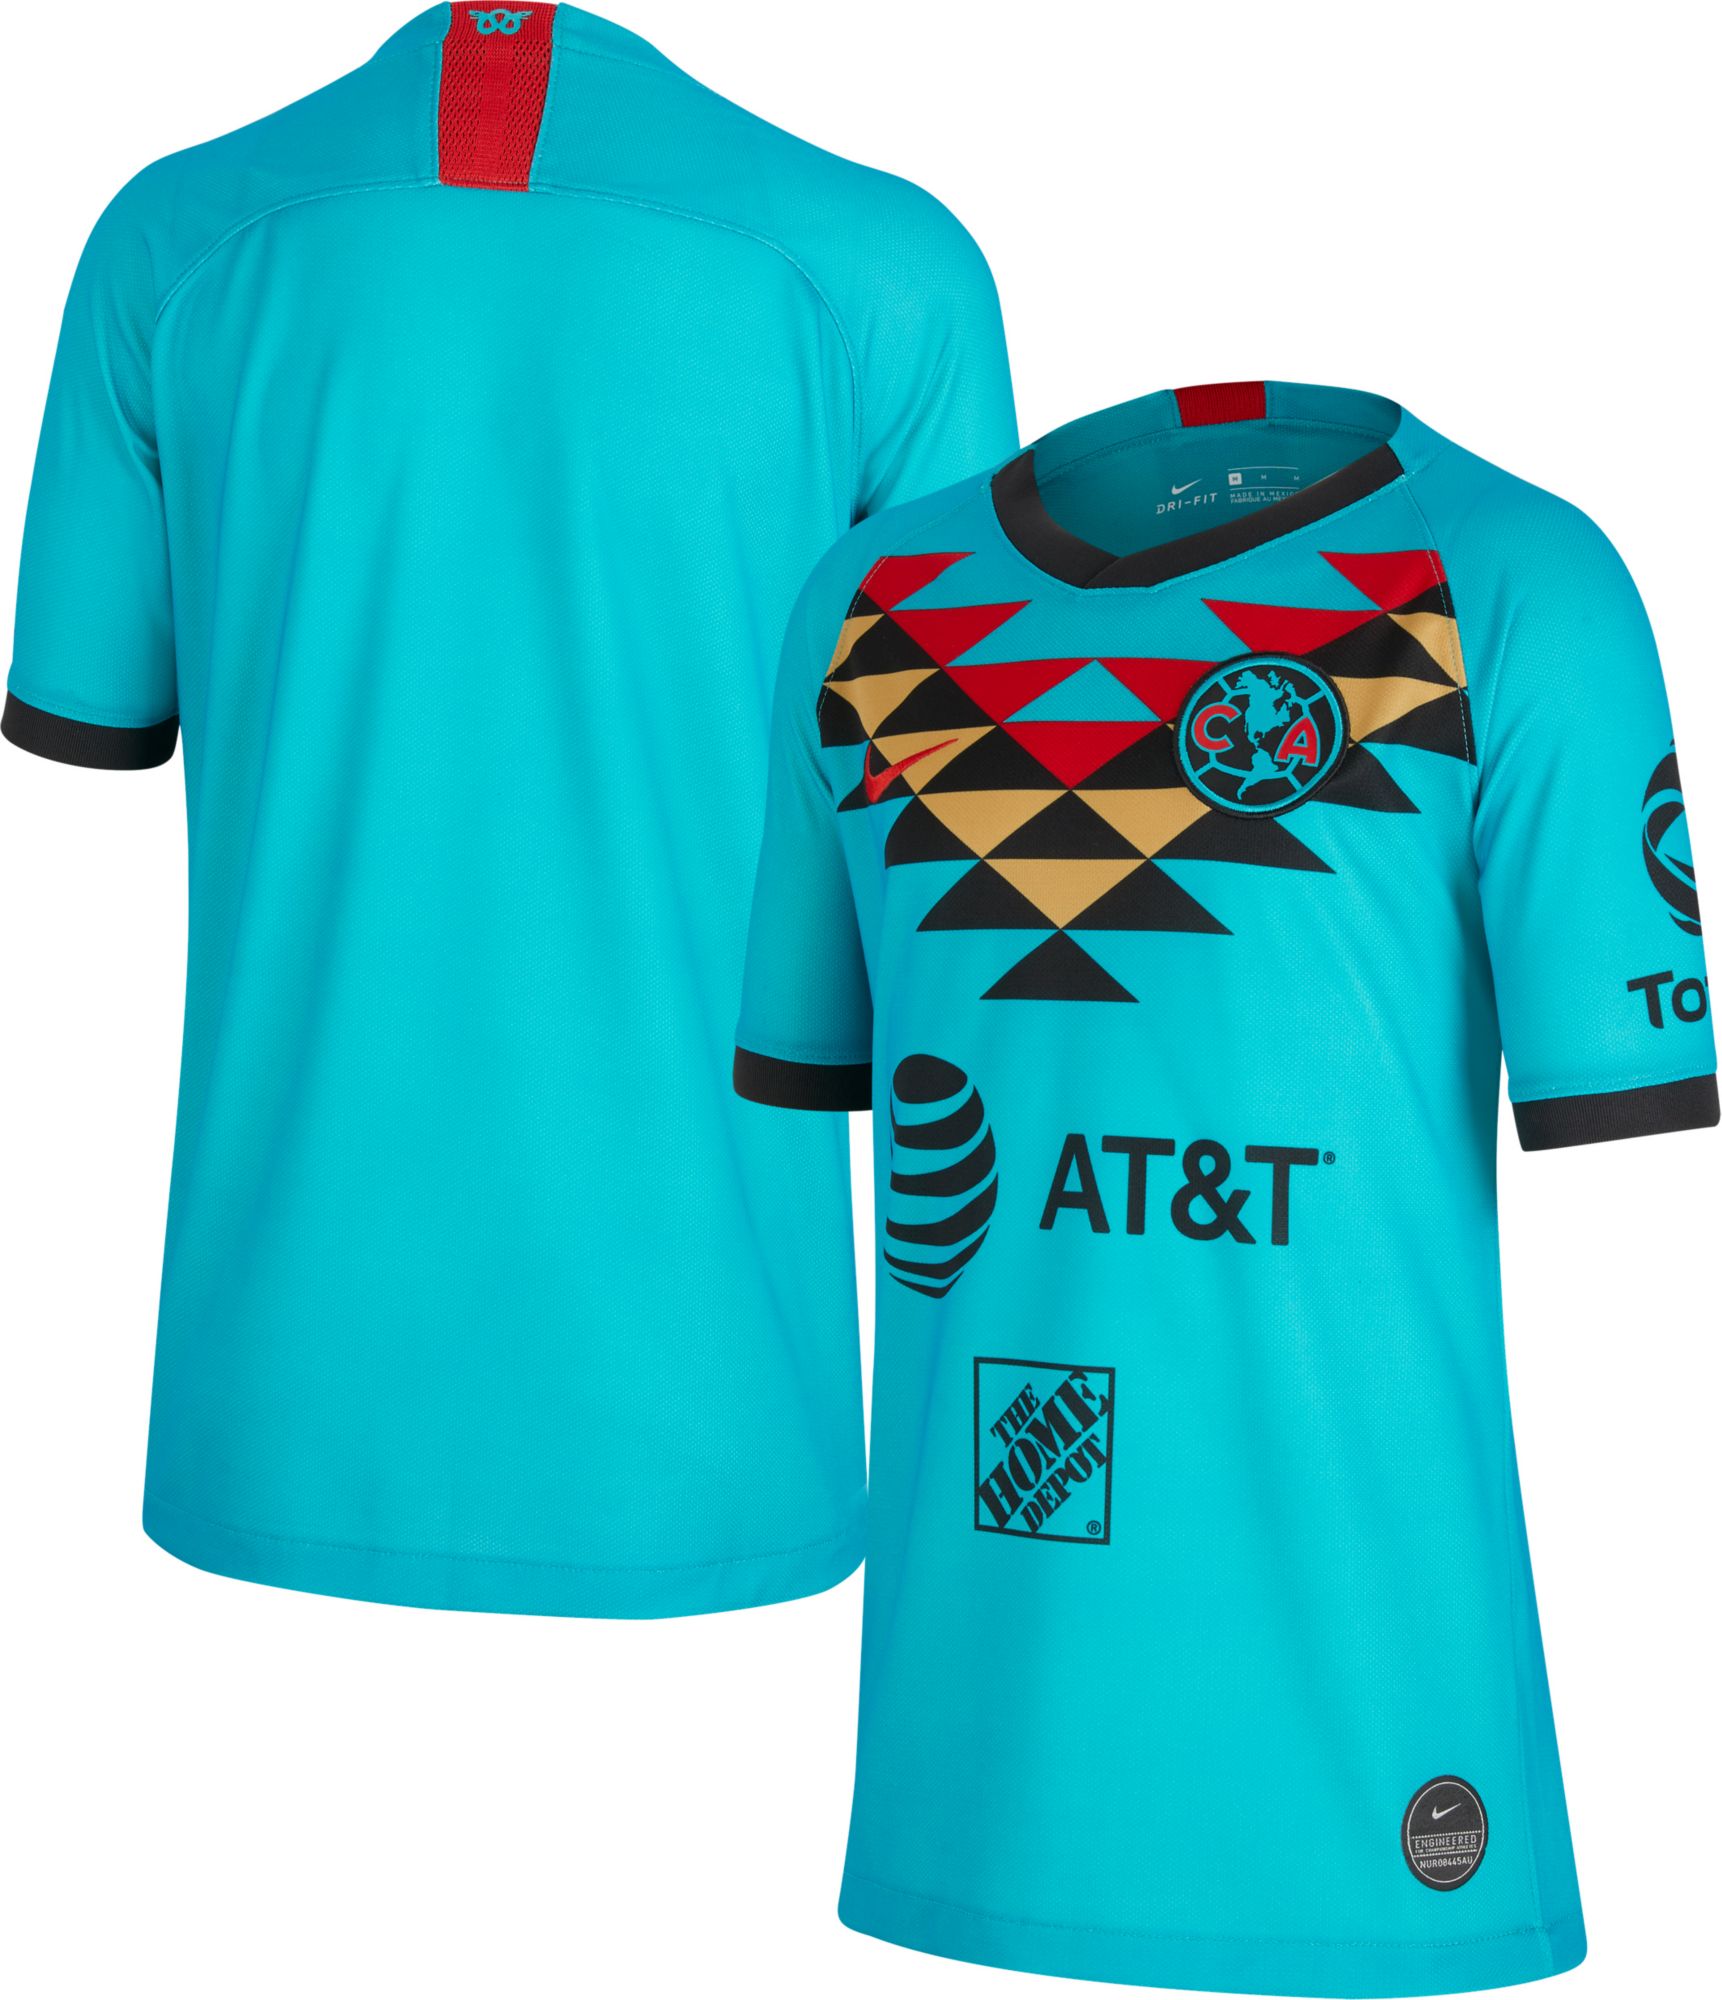 club america limited edition jersey